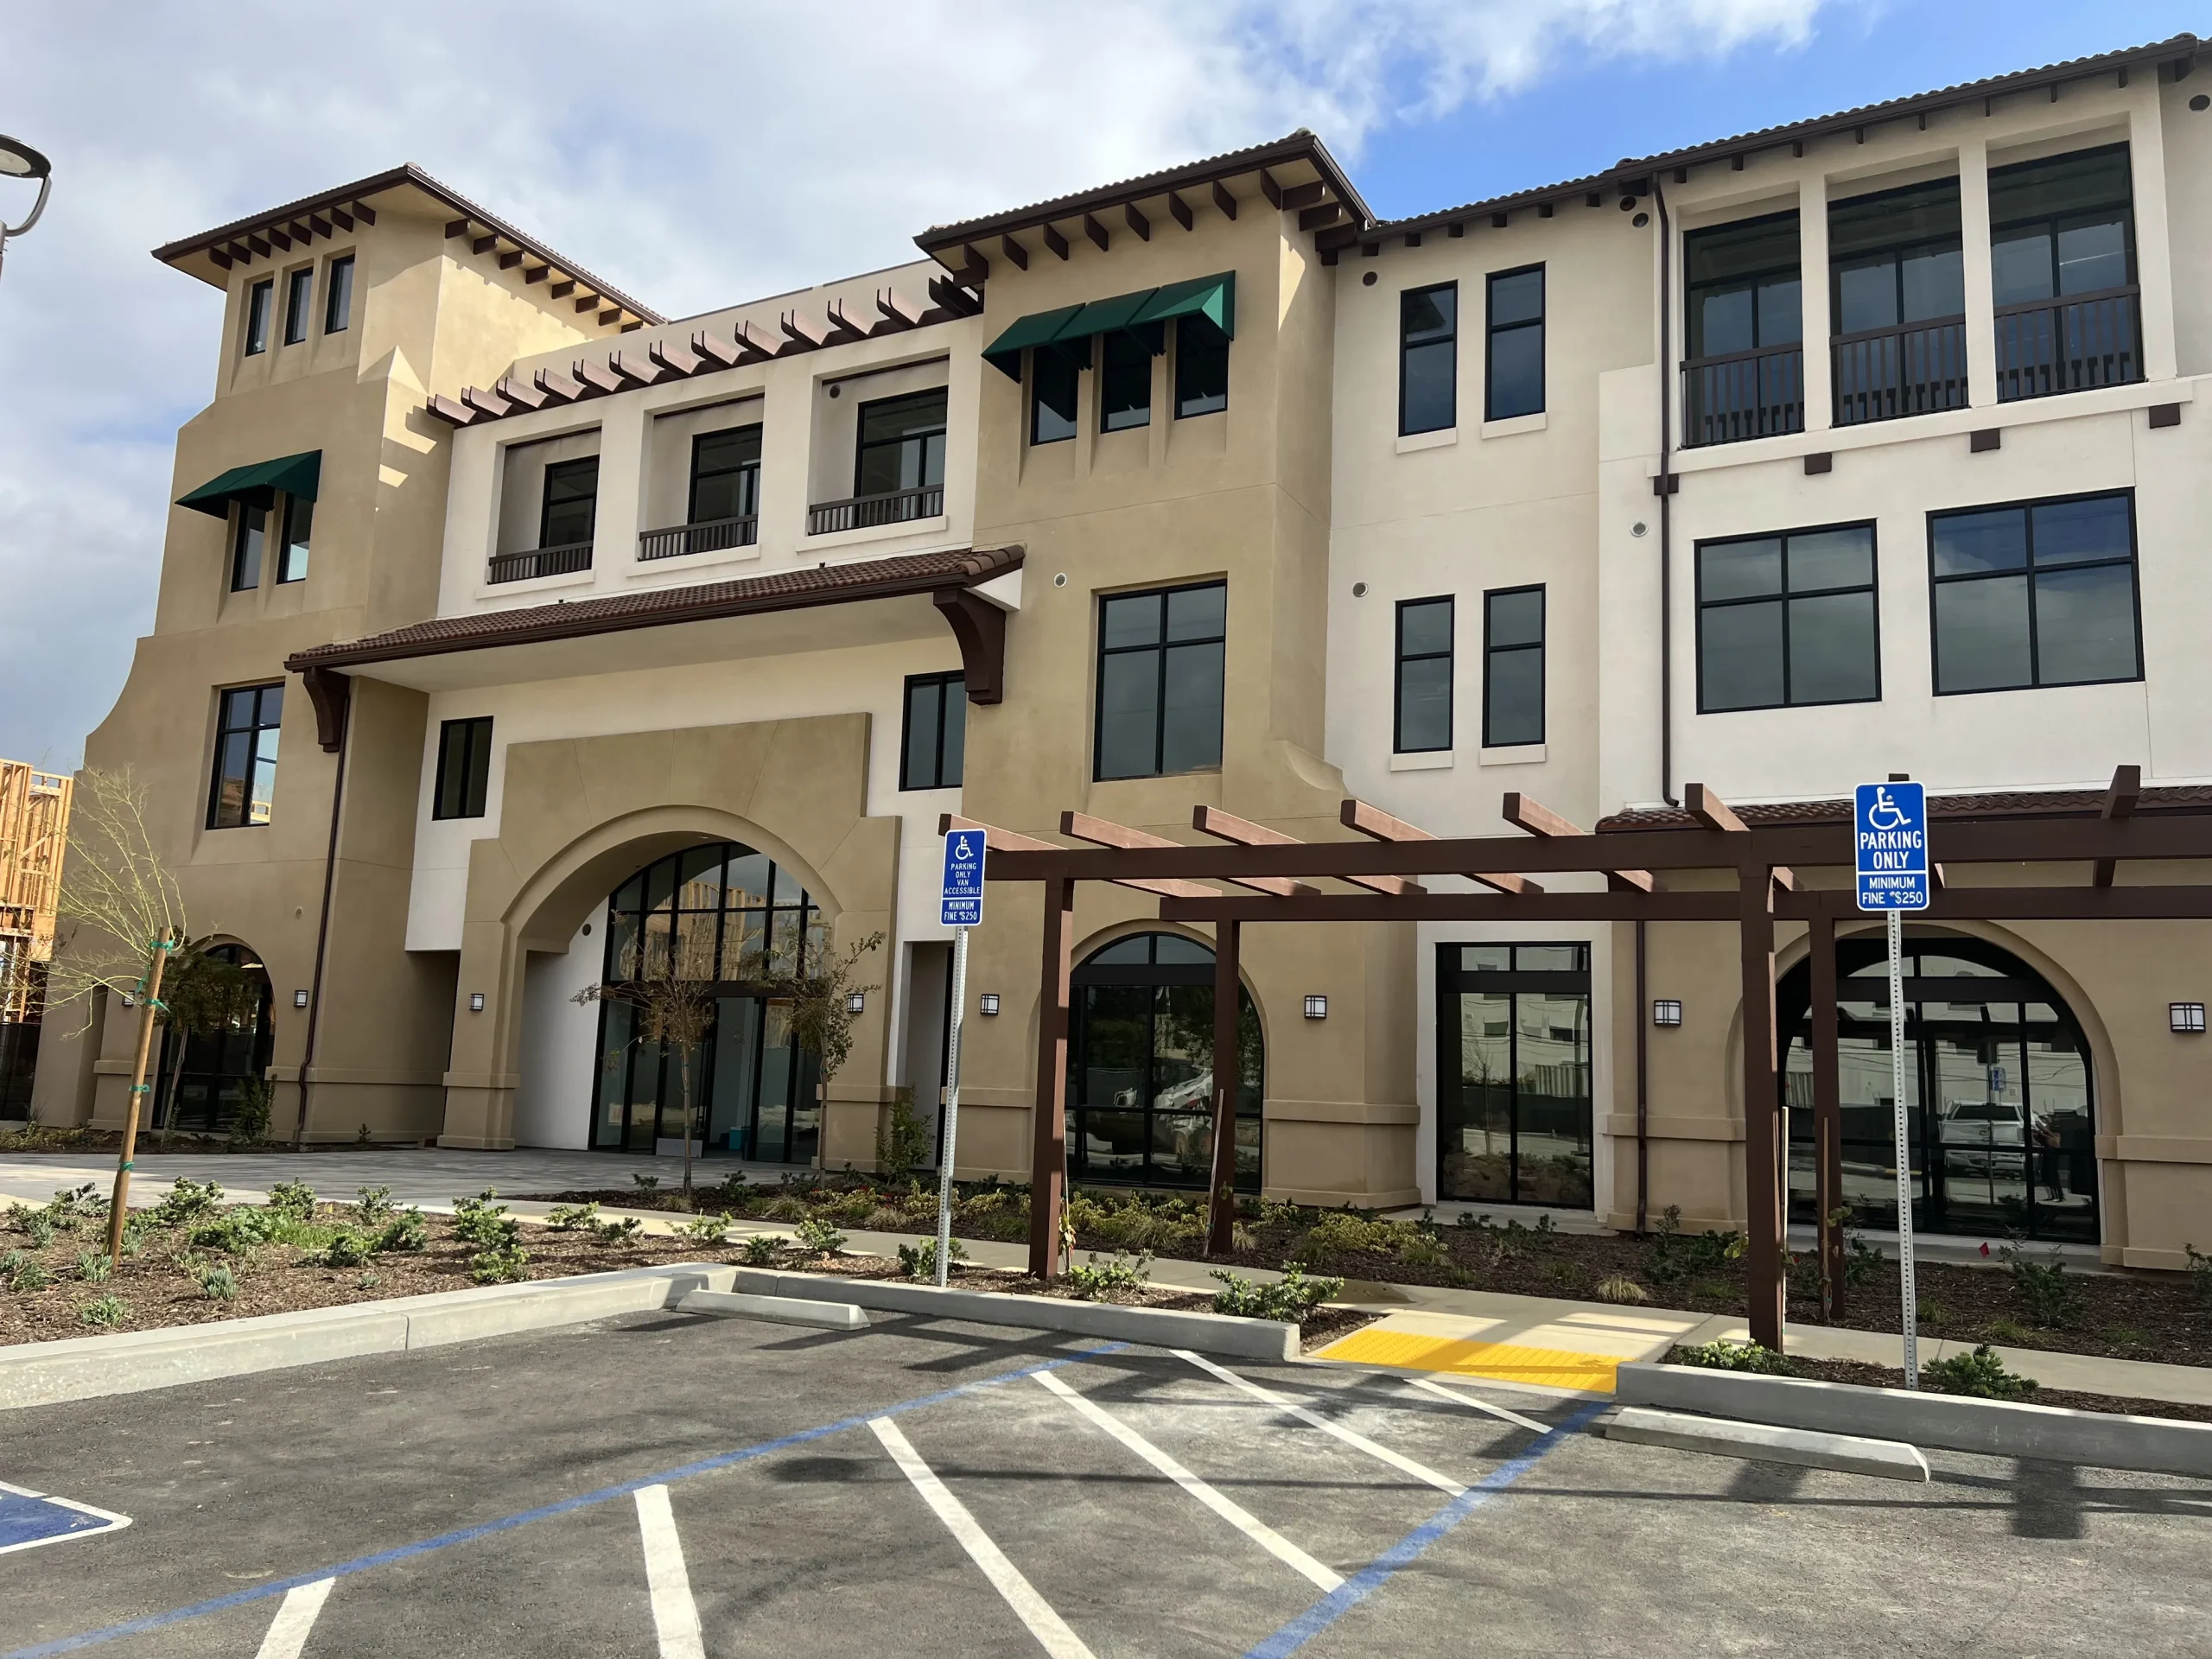 Chino Hills Physical Therapy Location